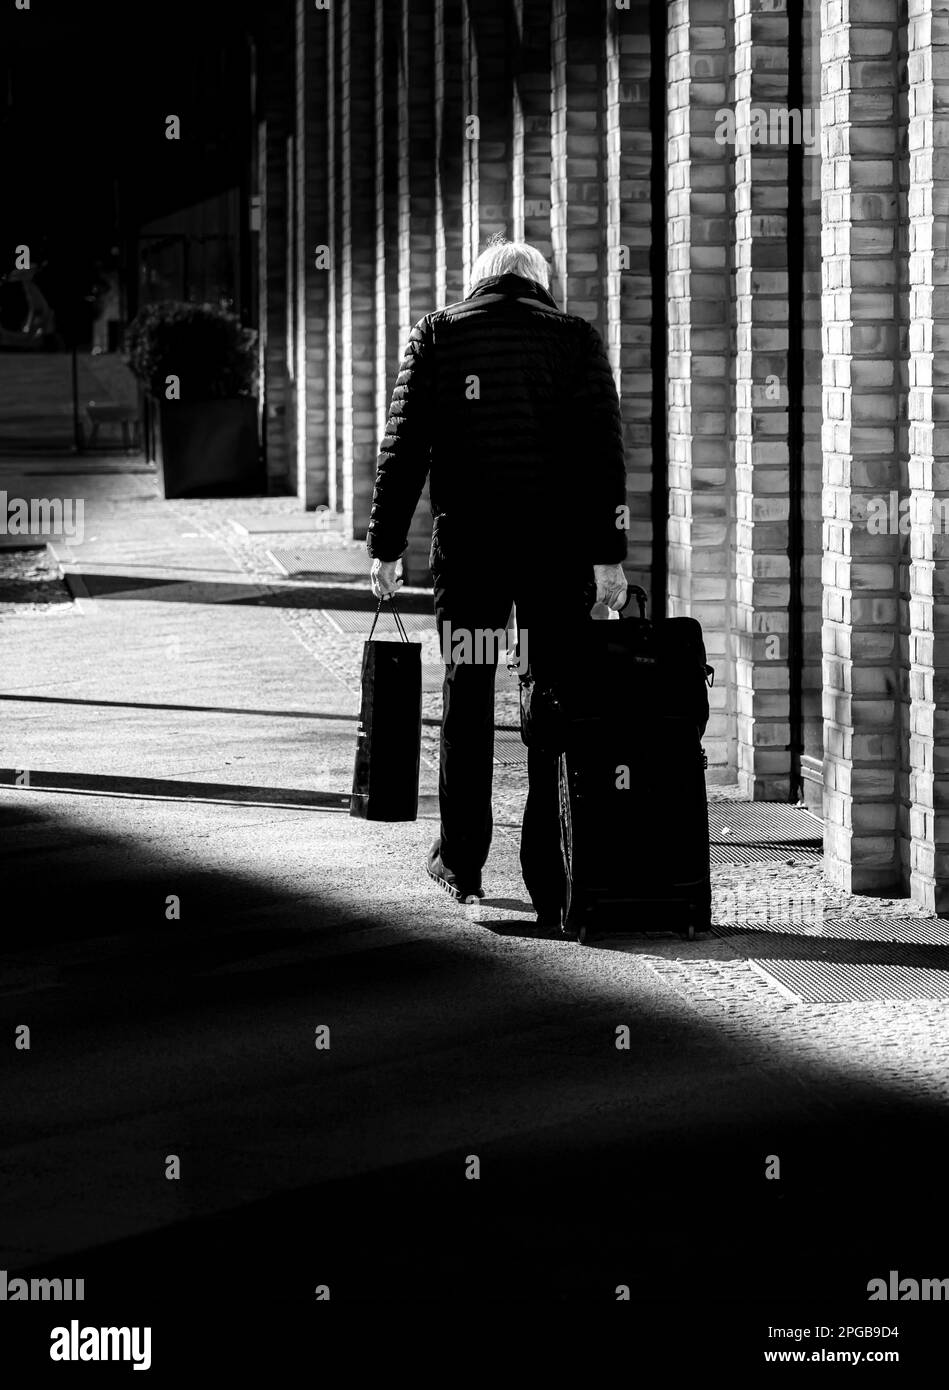 Black and white photography, senior citizen with suitcase, Berlin, Germany Stock Photo